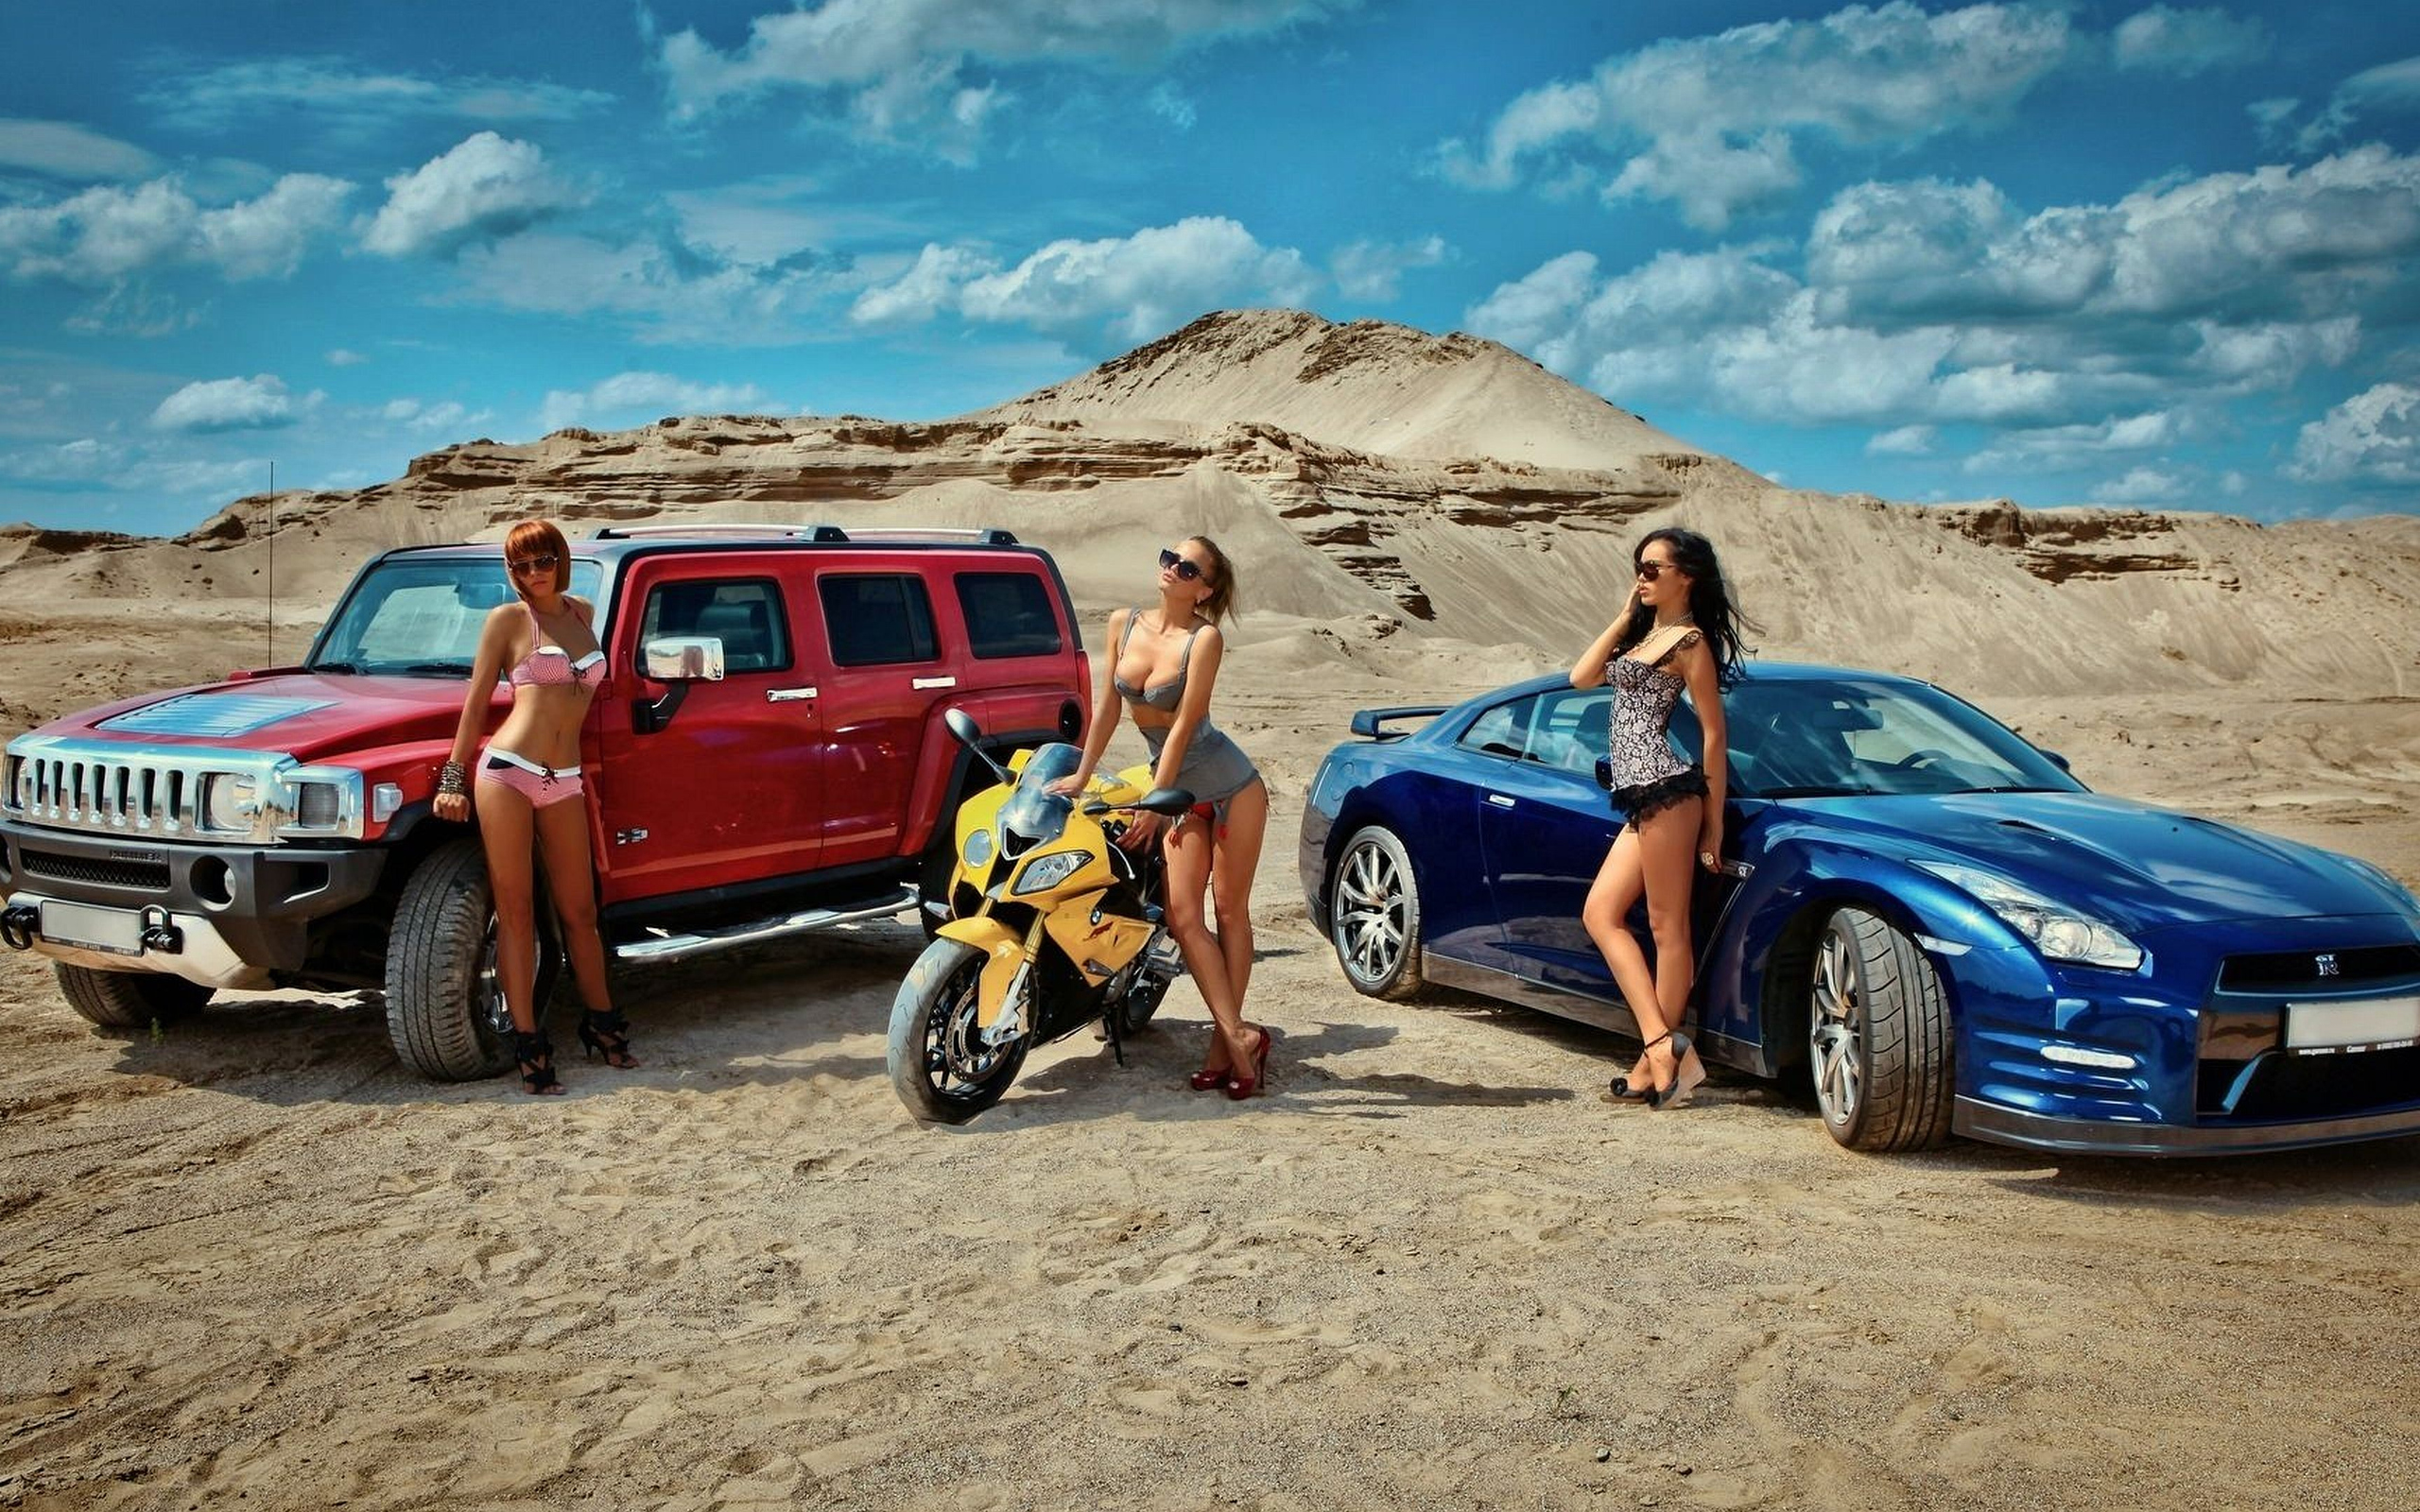 Download Girls and cars, Girls, Cars Wallpaper in 2560x1600 Resolution